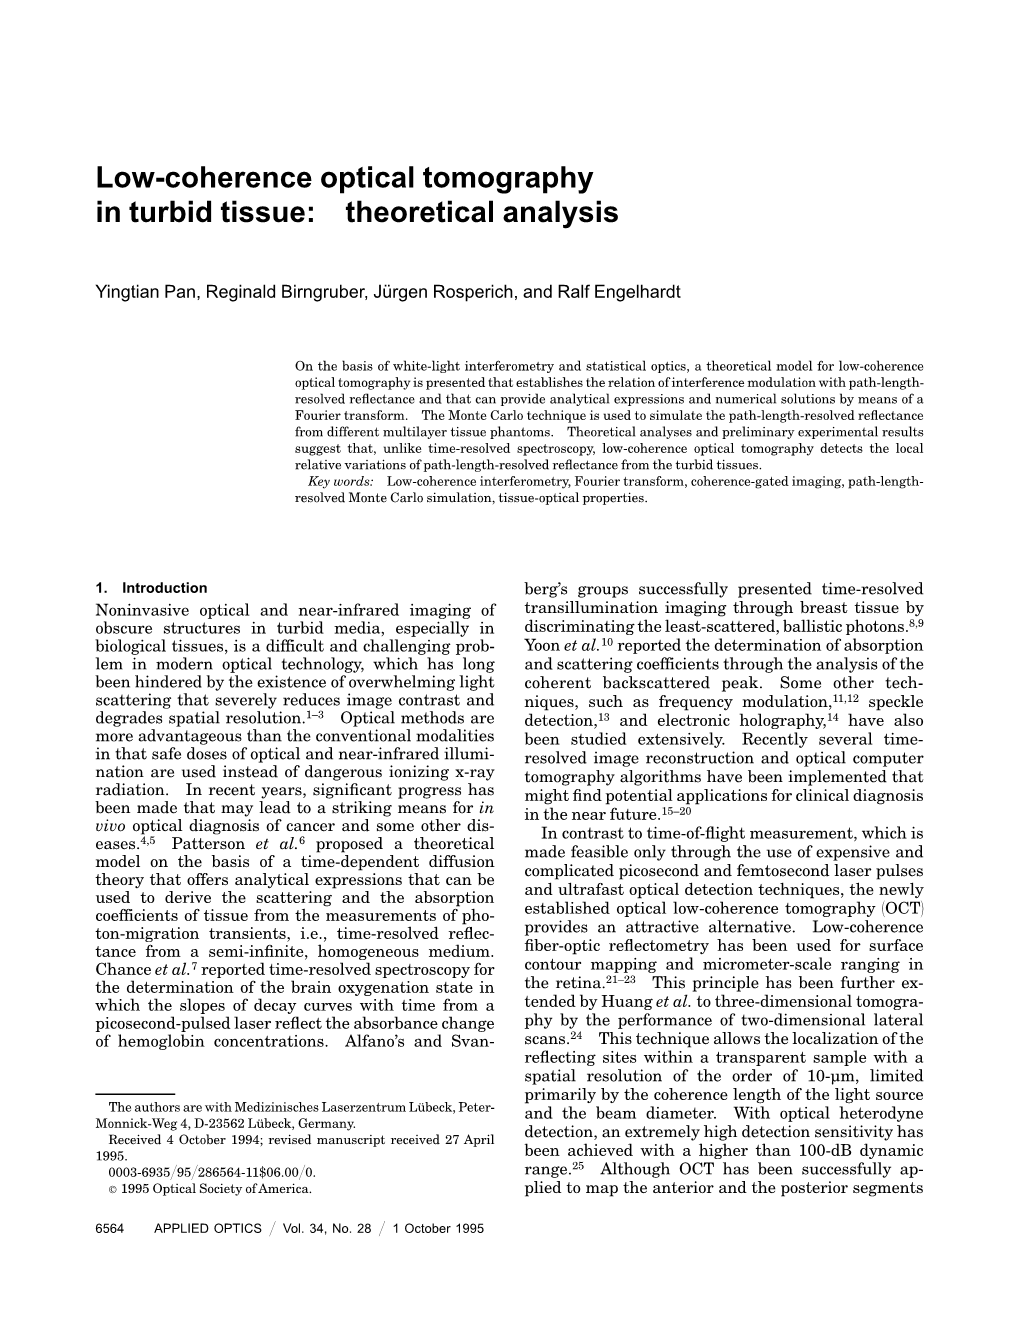 Low-Coherence Optical Tomography in Turbid Tissue: Theoretical Analysis